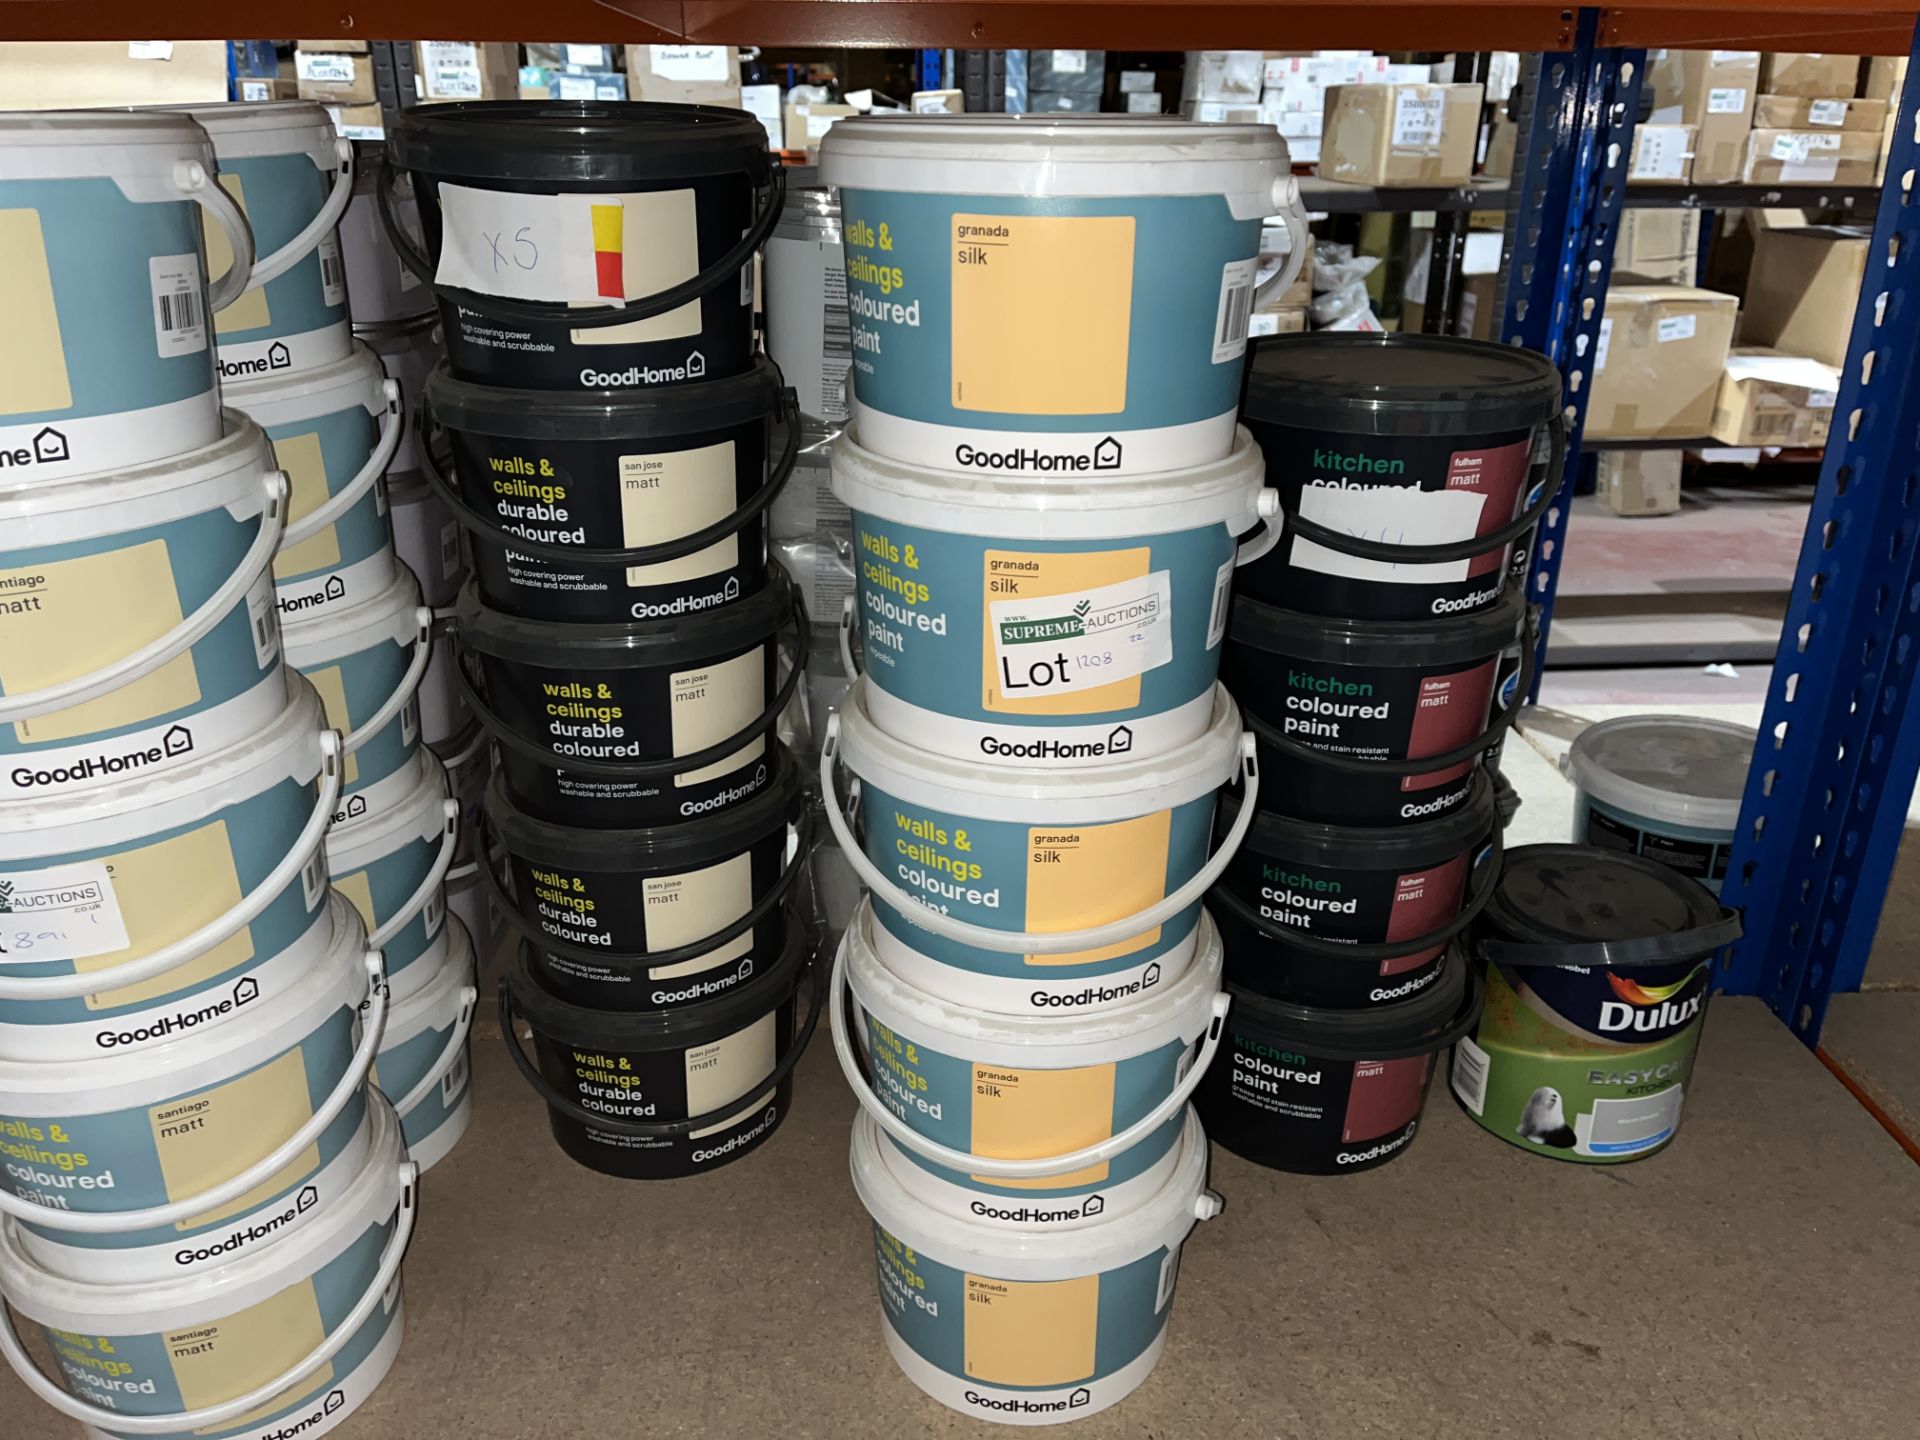 15 PIECE MIXED PAINT LOT INCLUDING GOODHOME GRANADA, GOODHOME FULUHAM, DULUX PCK